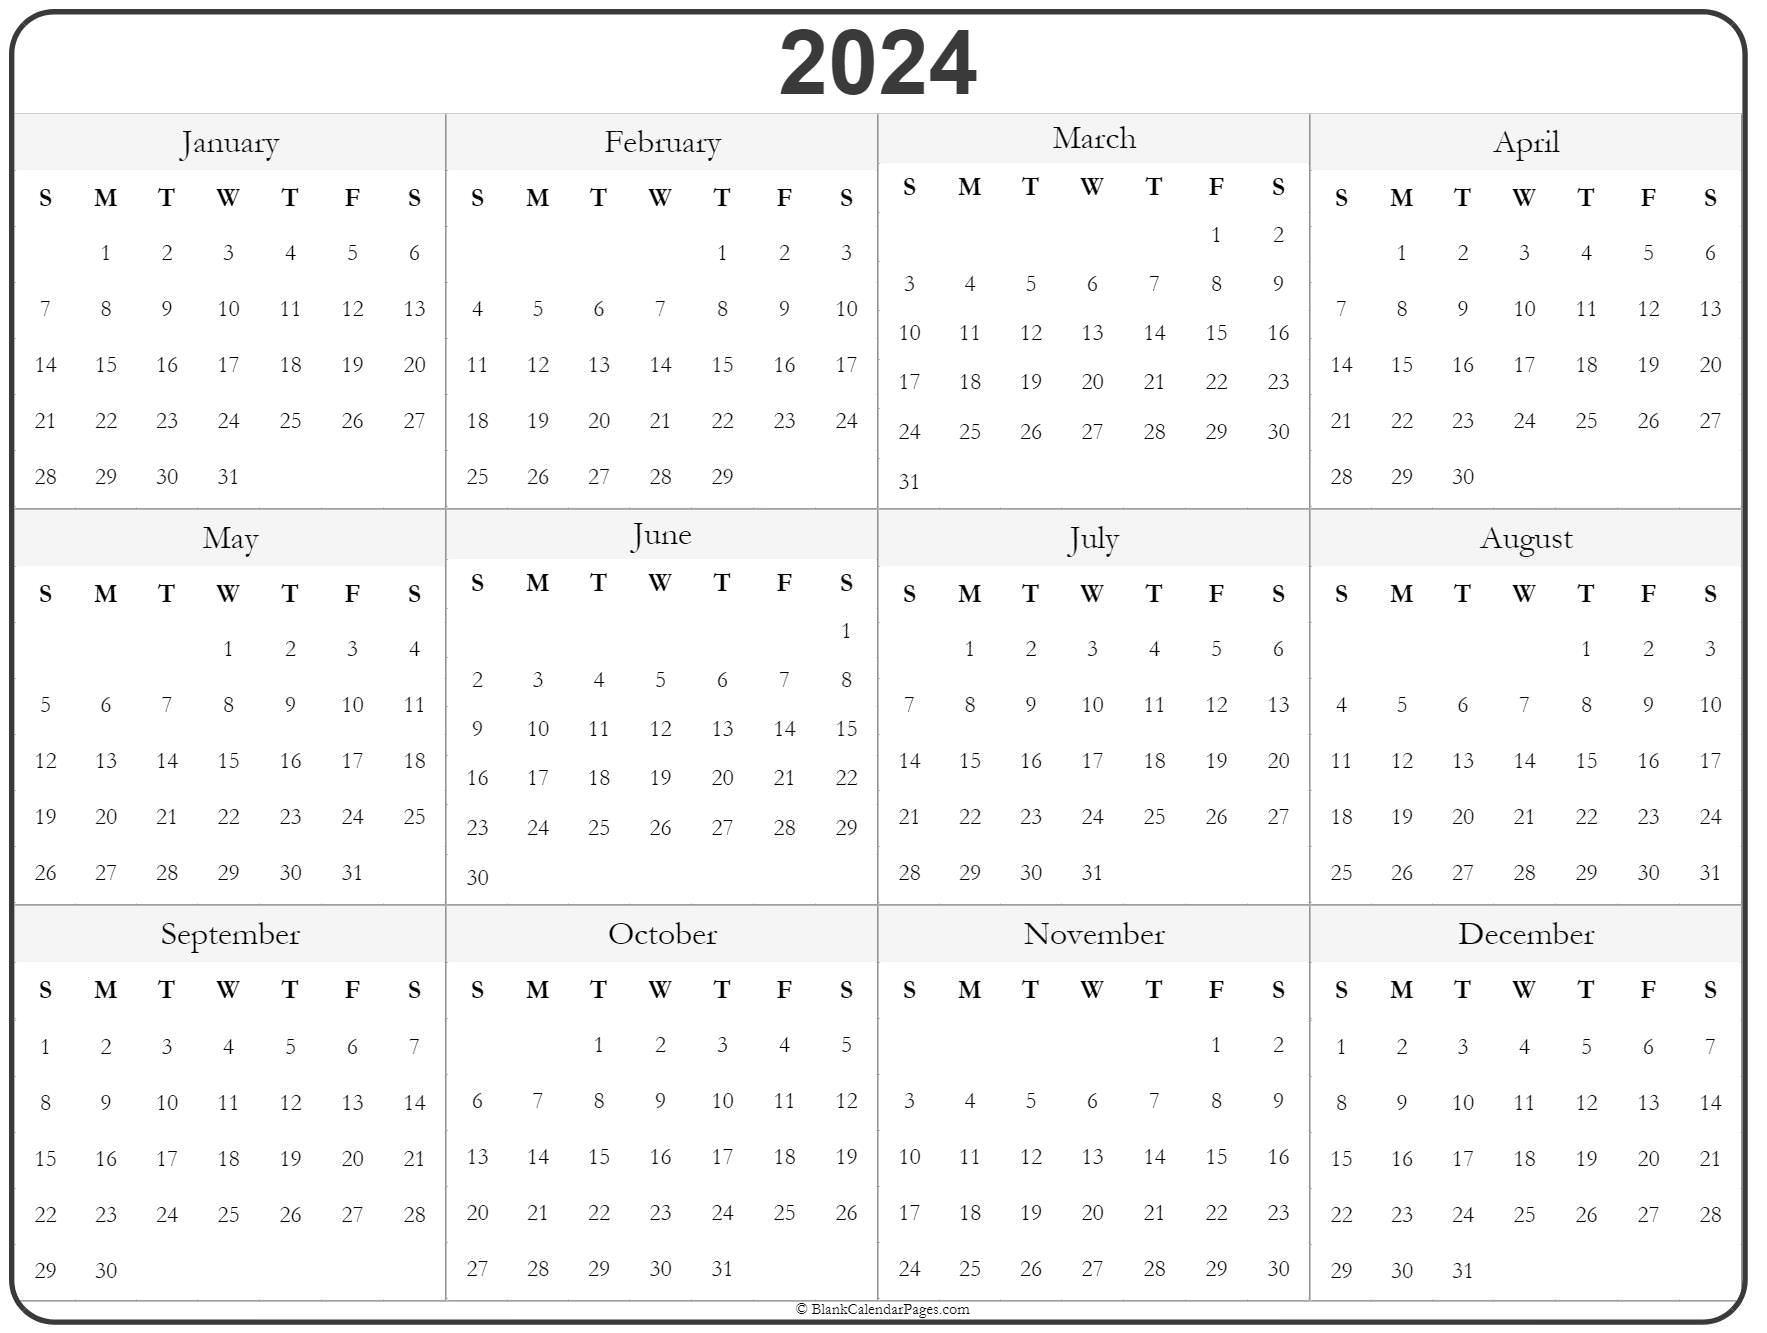 Free 2021 Yearly Calender Template 2021 Editable Yearly Calendar Free 